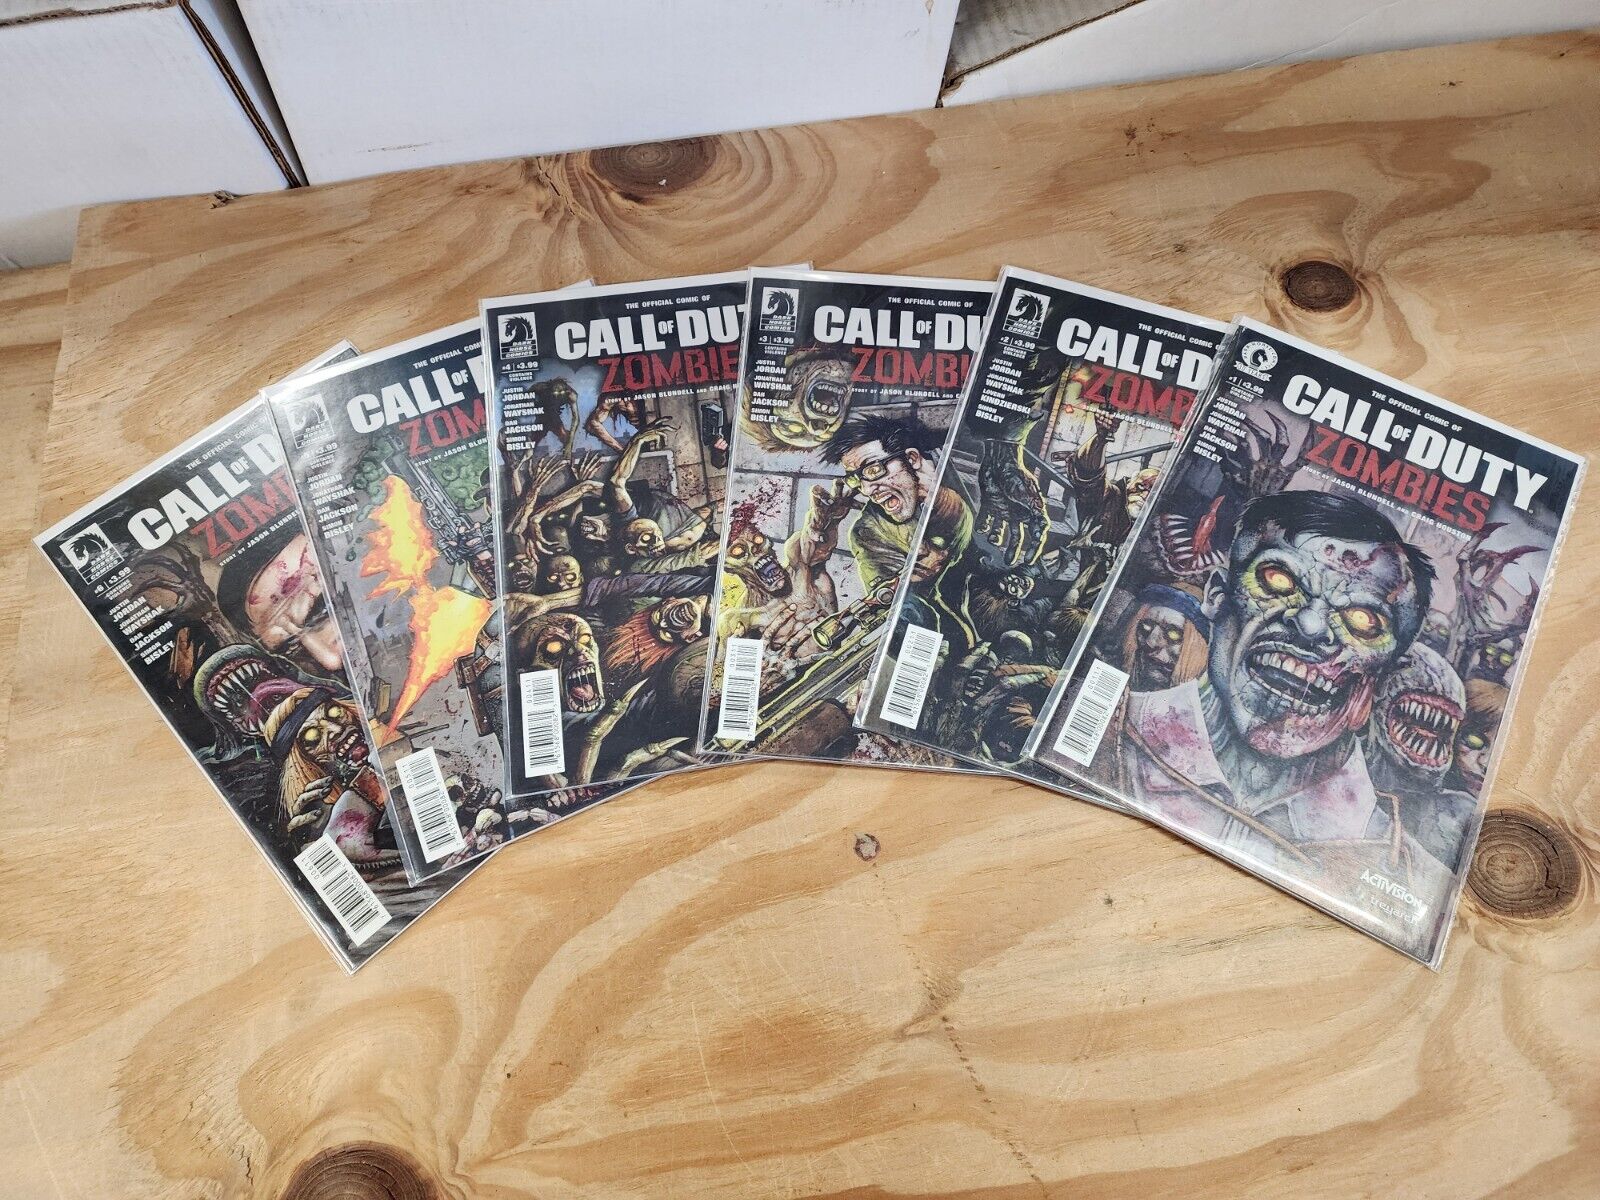 CALL OF DUTY ZOMBIES #1-6 COMPLETE RUN COVERS BY SIMON BISLEY 2017 Dark Horse